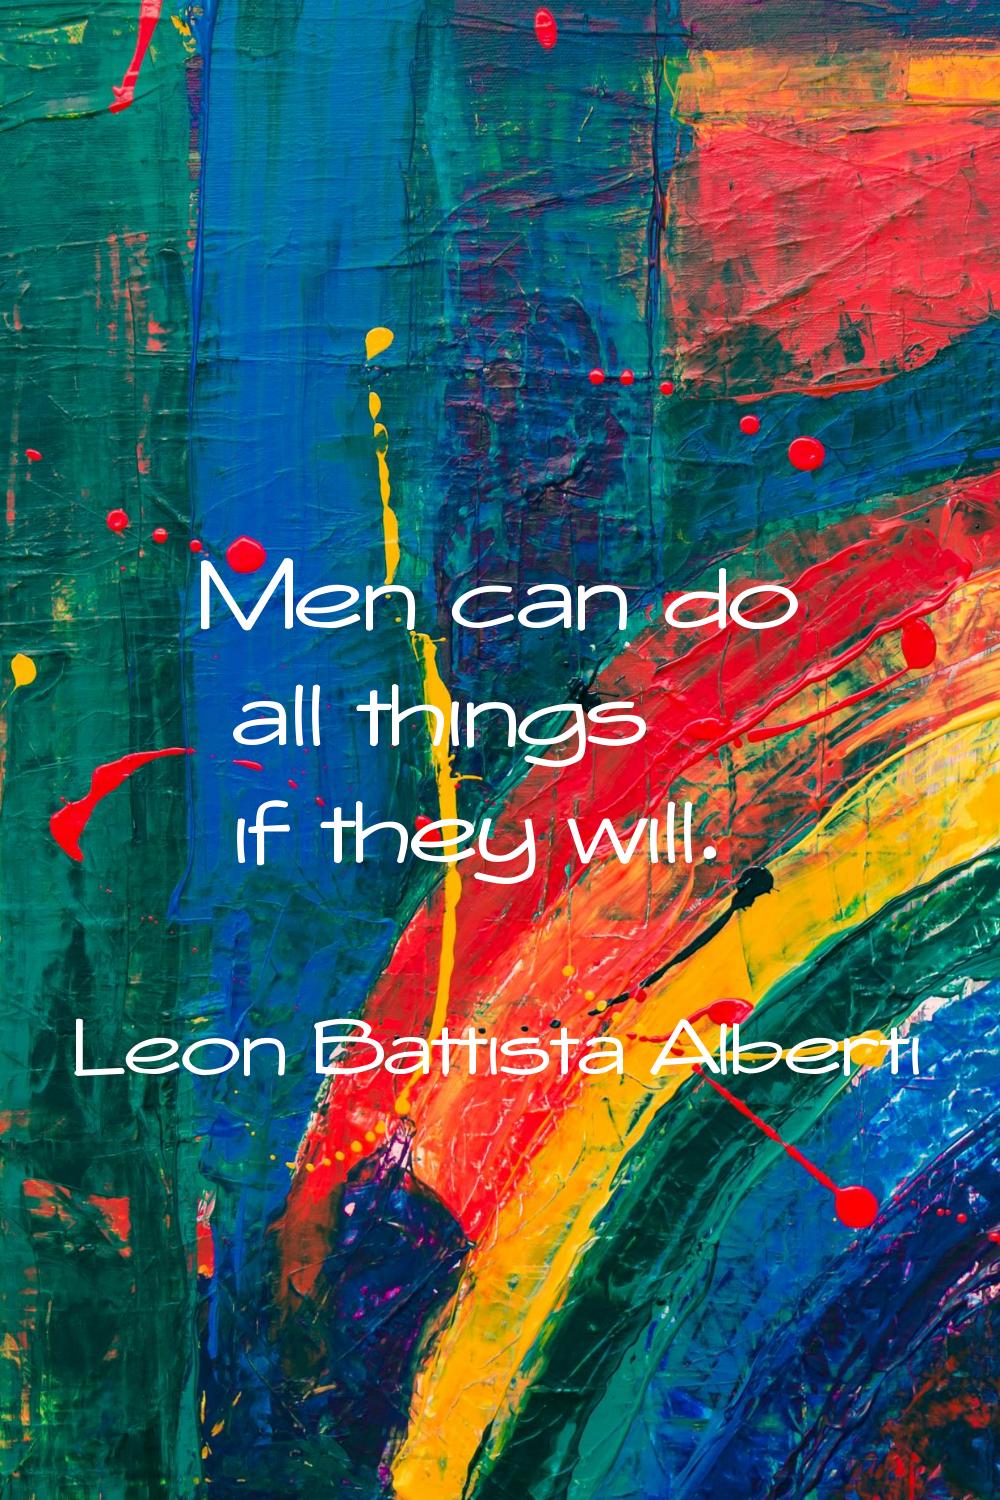 Men can do all things if they will.